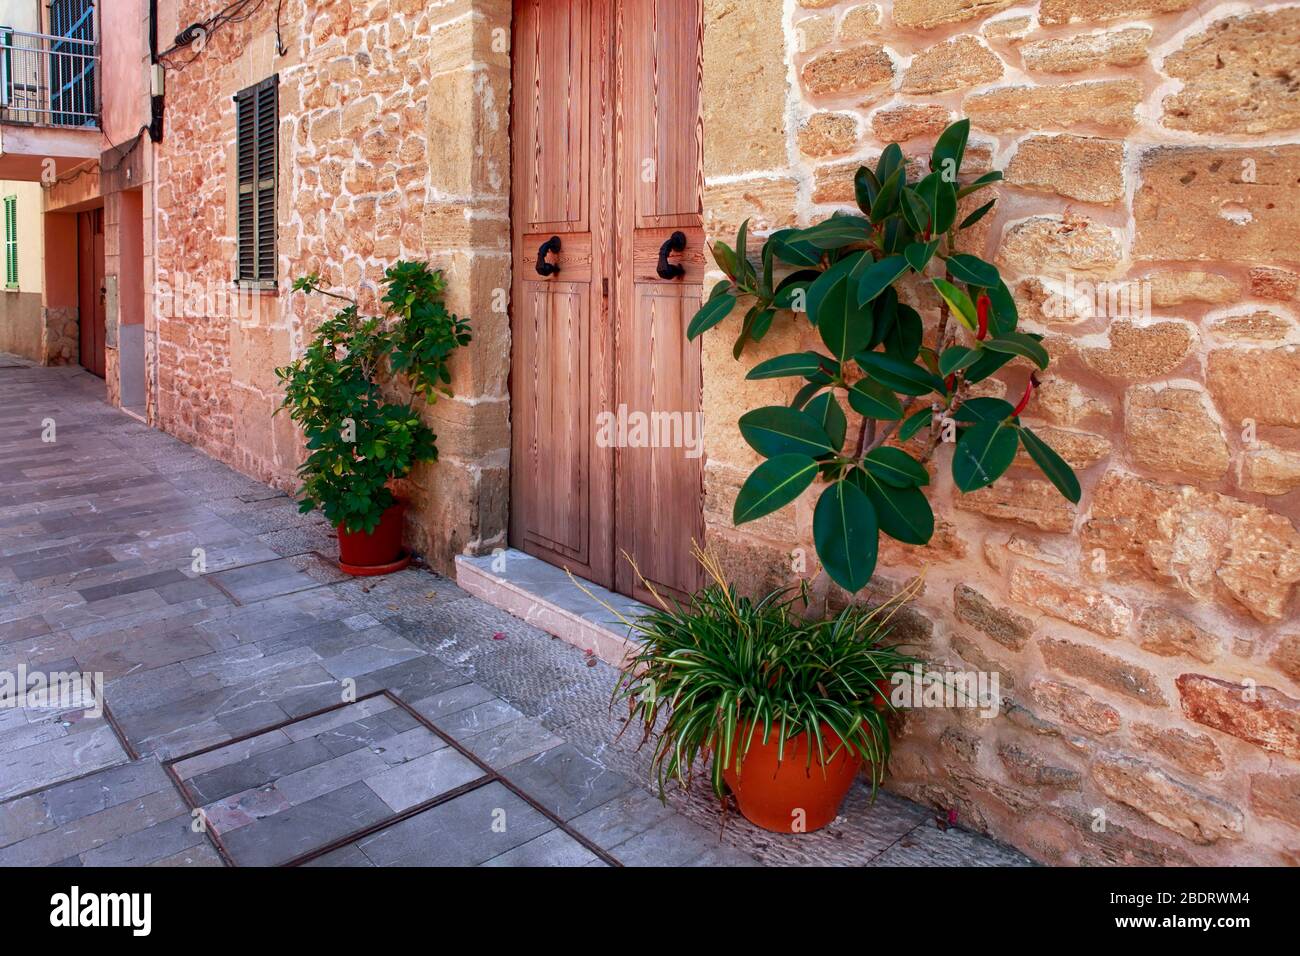 The narrow street in the old town of Alcudia, Mallorca Stock Photo